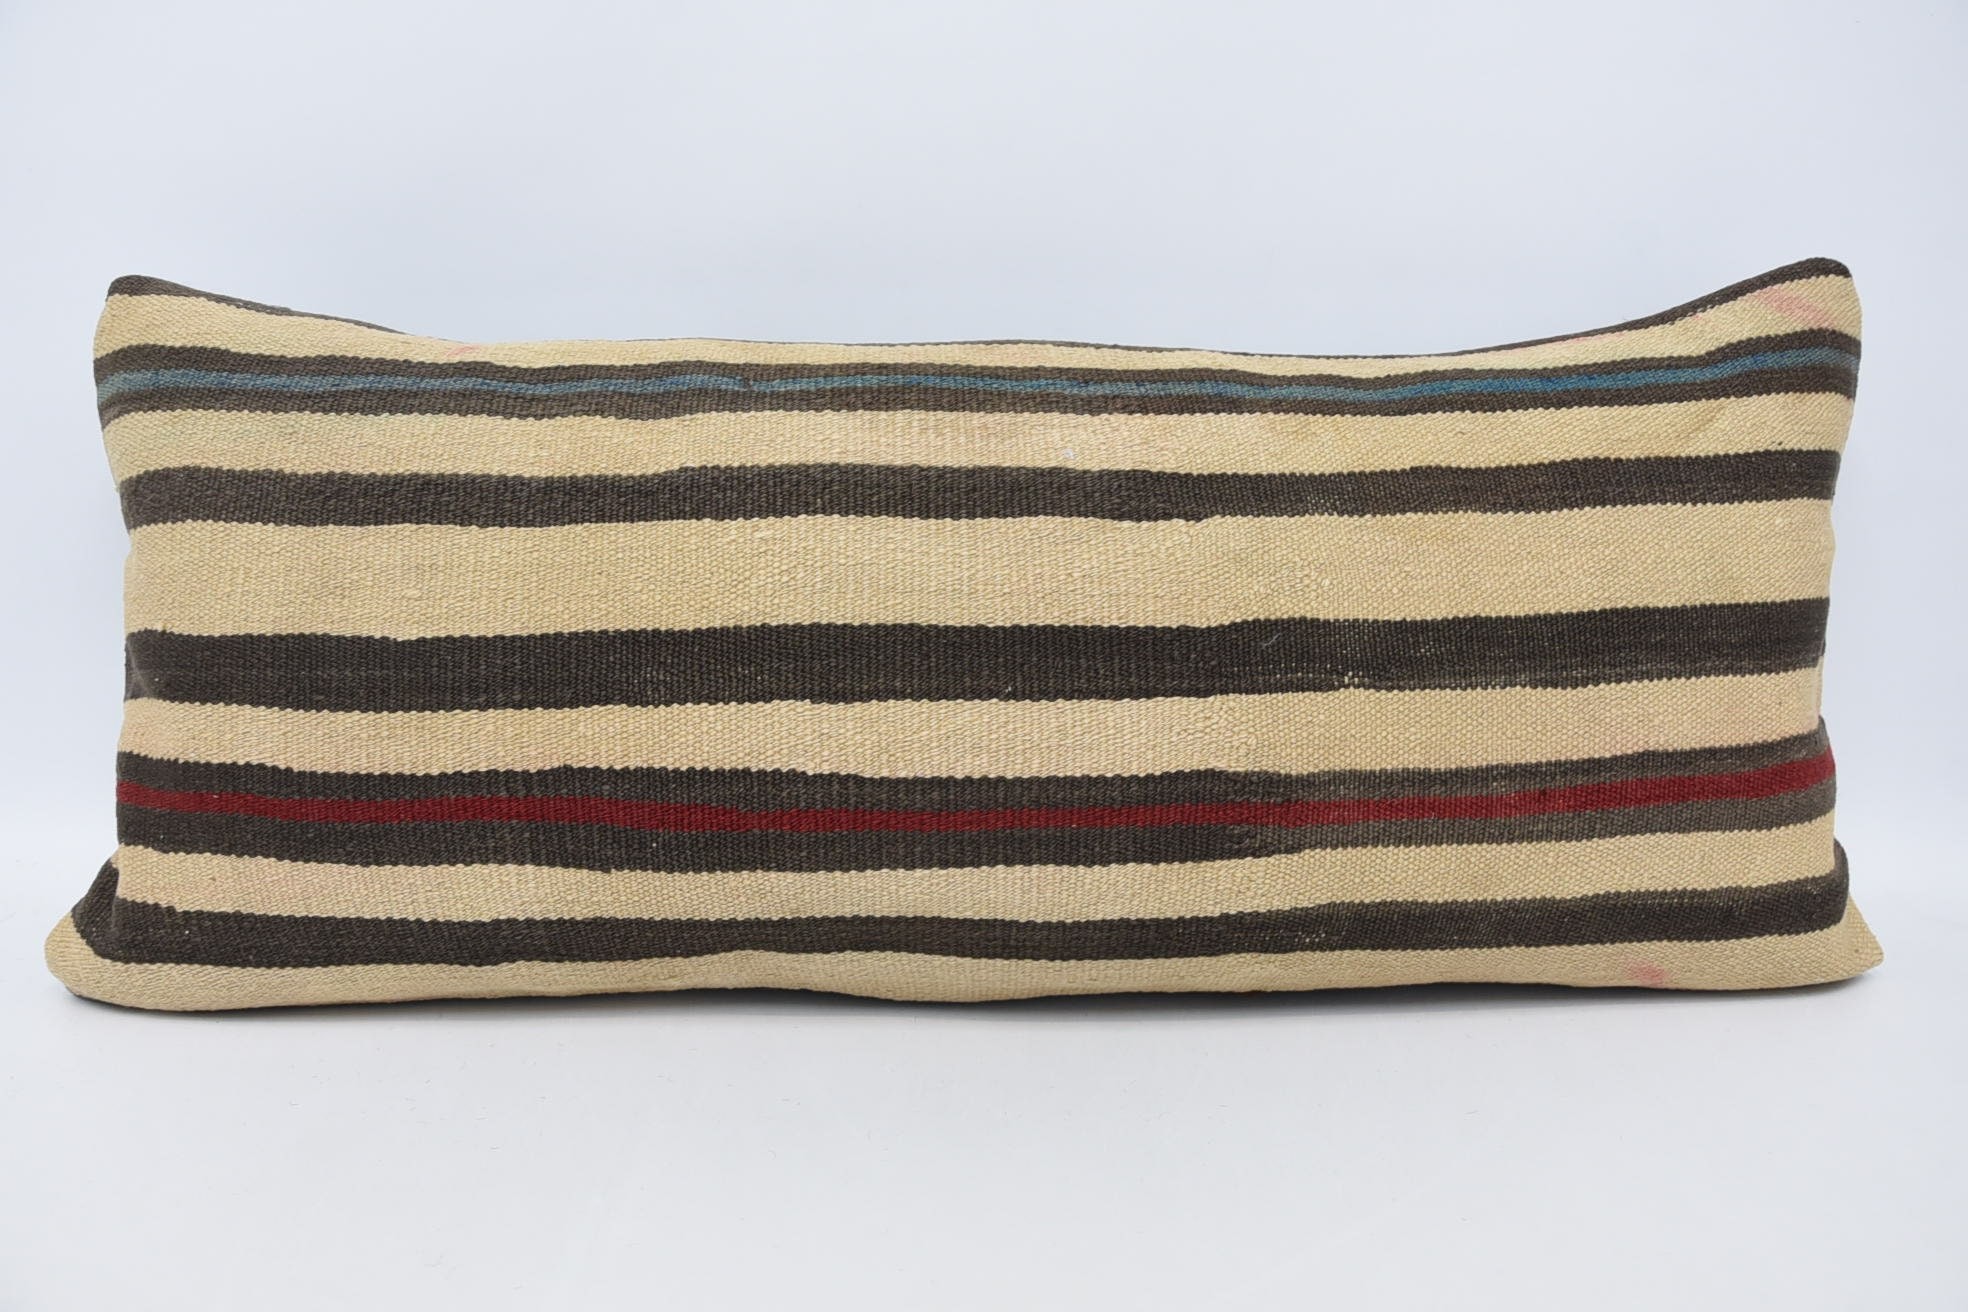 Pillow for Sofa, Pillow for Couch, Boho Chic Cushion Case, 16"x36" Beige Cushion Case, Vintage Kilim Throw Pillow